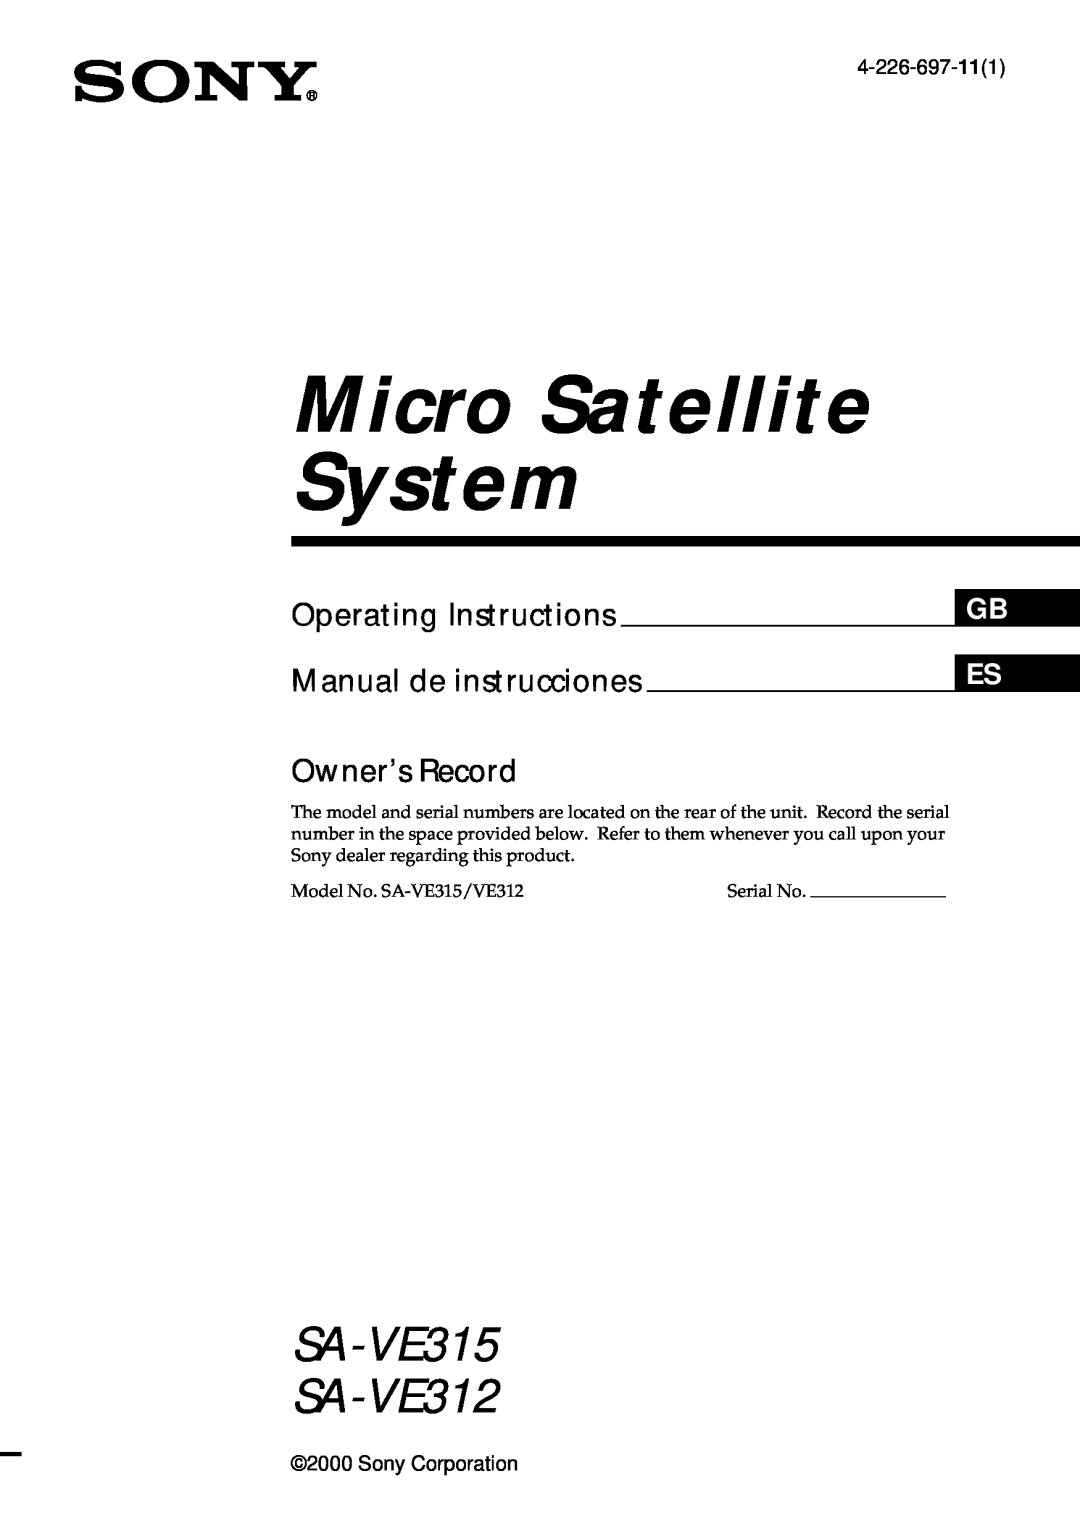 Sony manual Micro Satellite System, SA-VE315 SA-VE312, Operating Instructions, Manual de instrucciones, Owner’s Record 